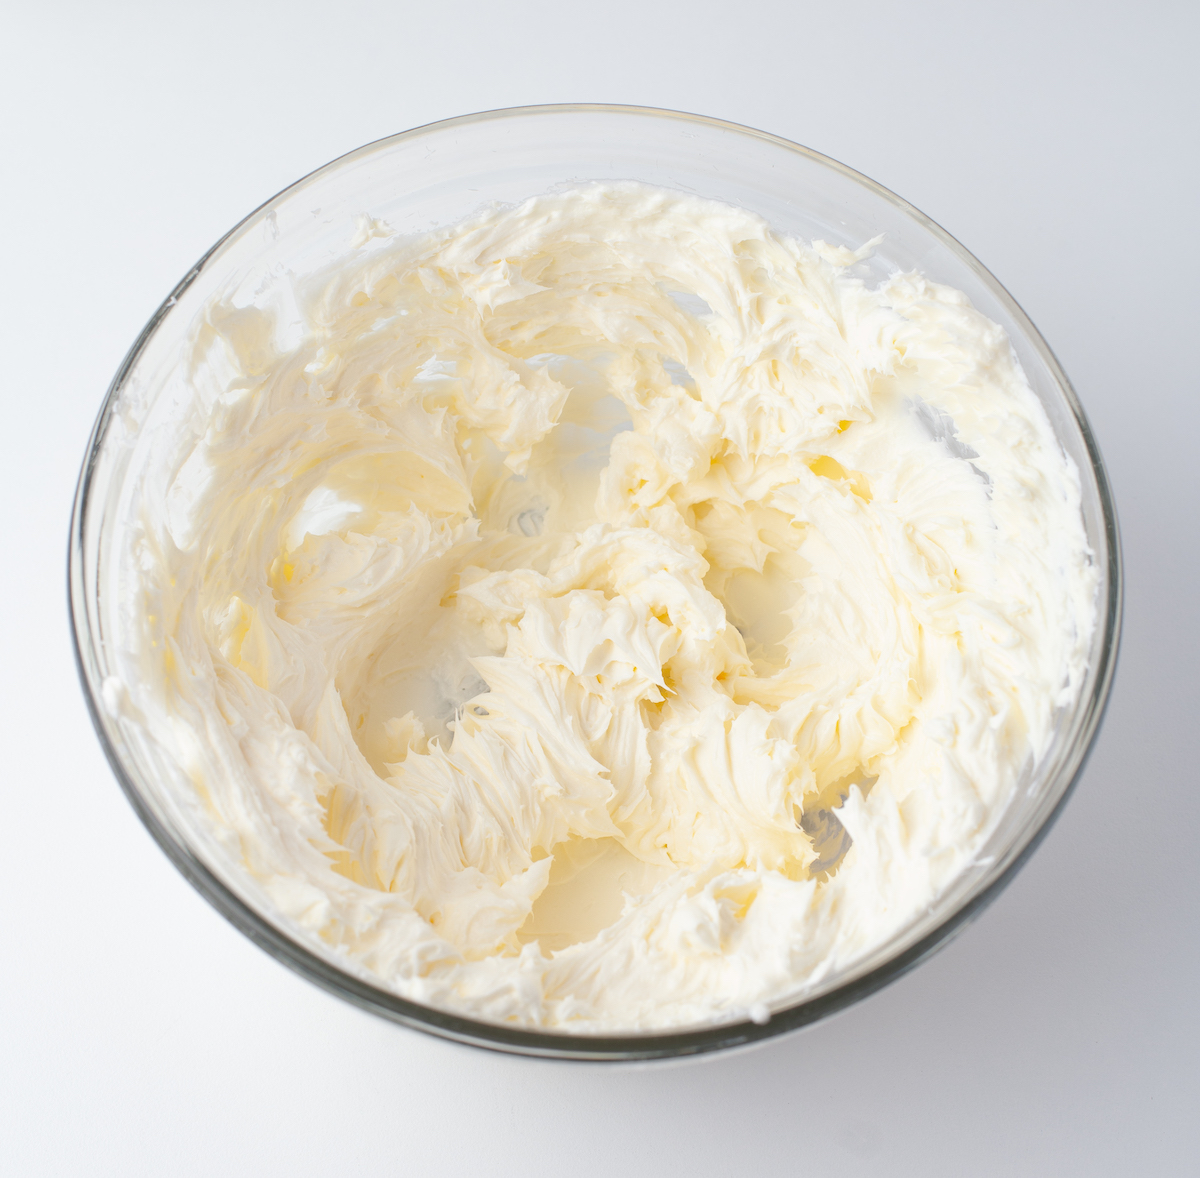 Cream cheese and butter whipped together in a bowl